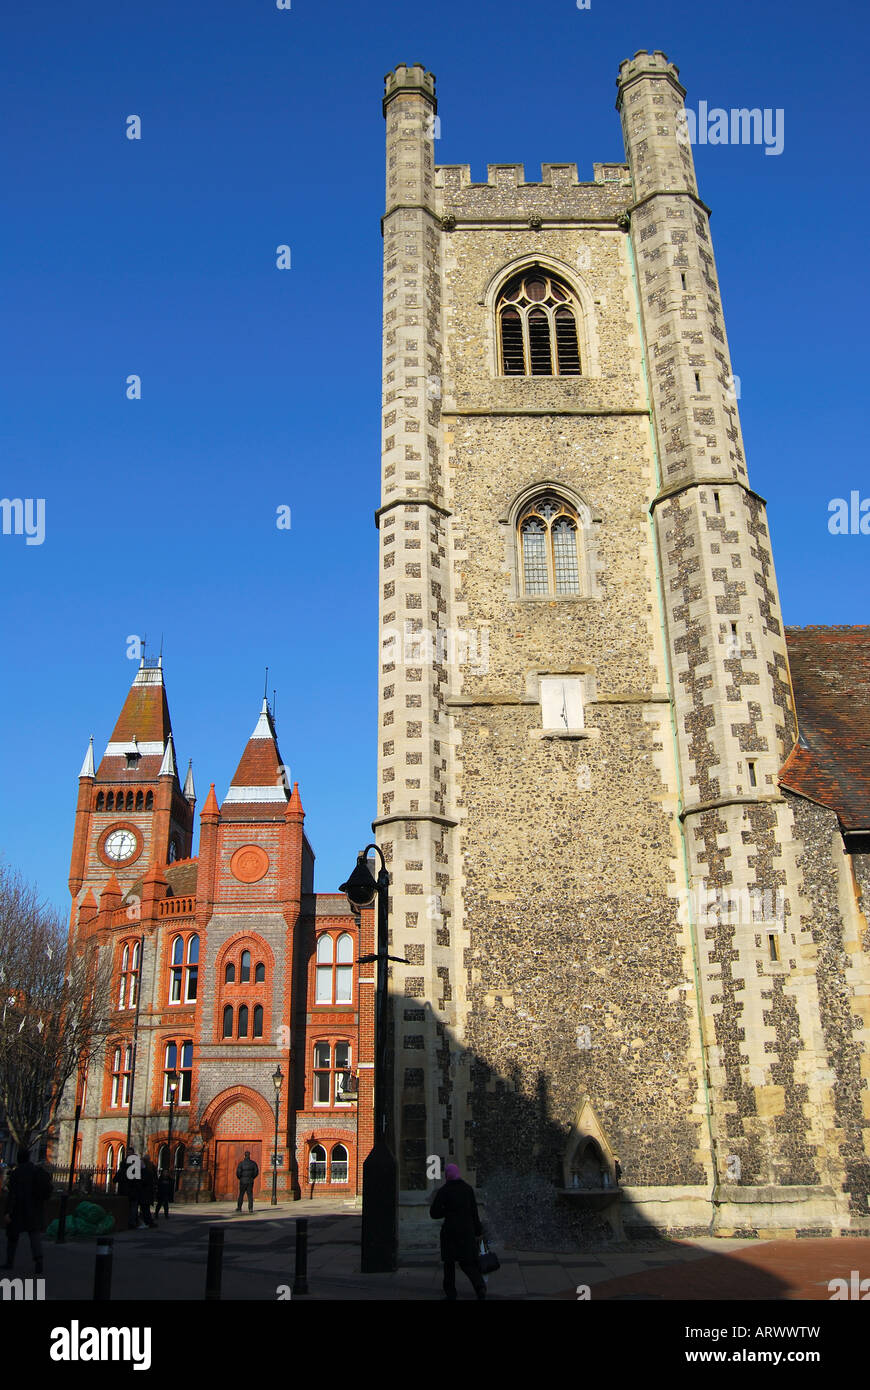 St Lawrence's Church Tower and Town Hall, The Butter Market, Reading, Berkshire, England. United Kingdom Stock Photo